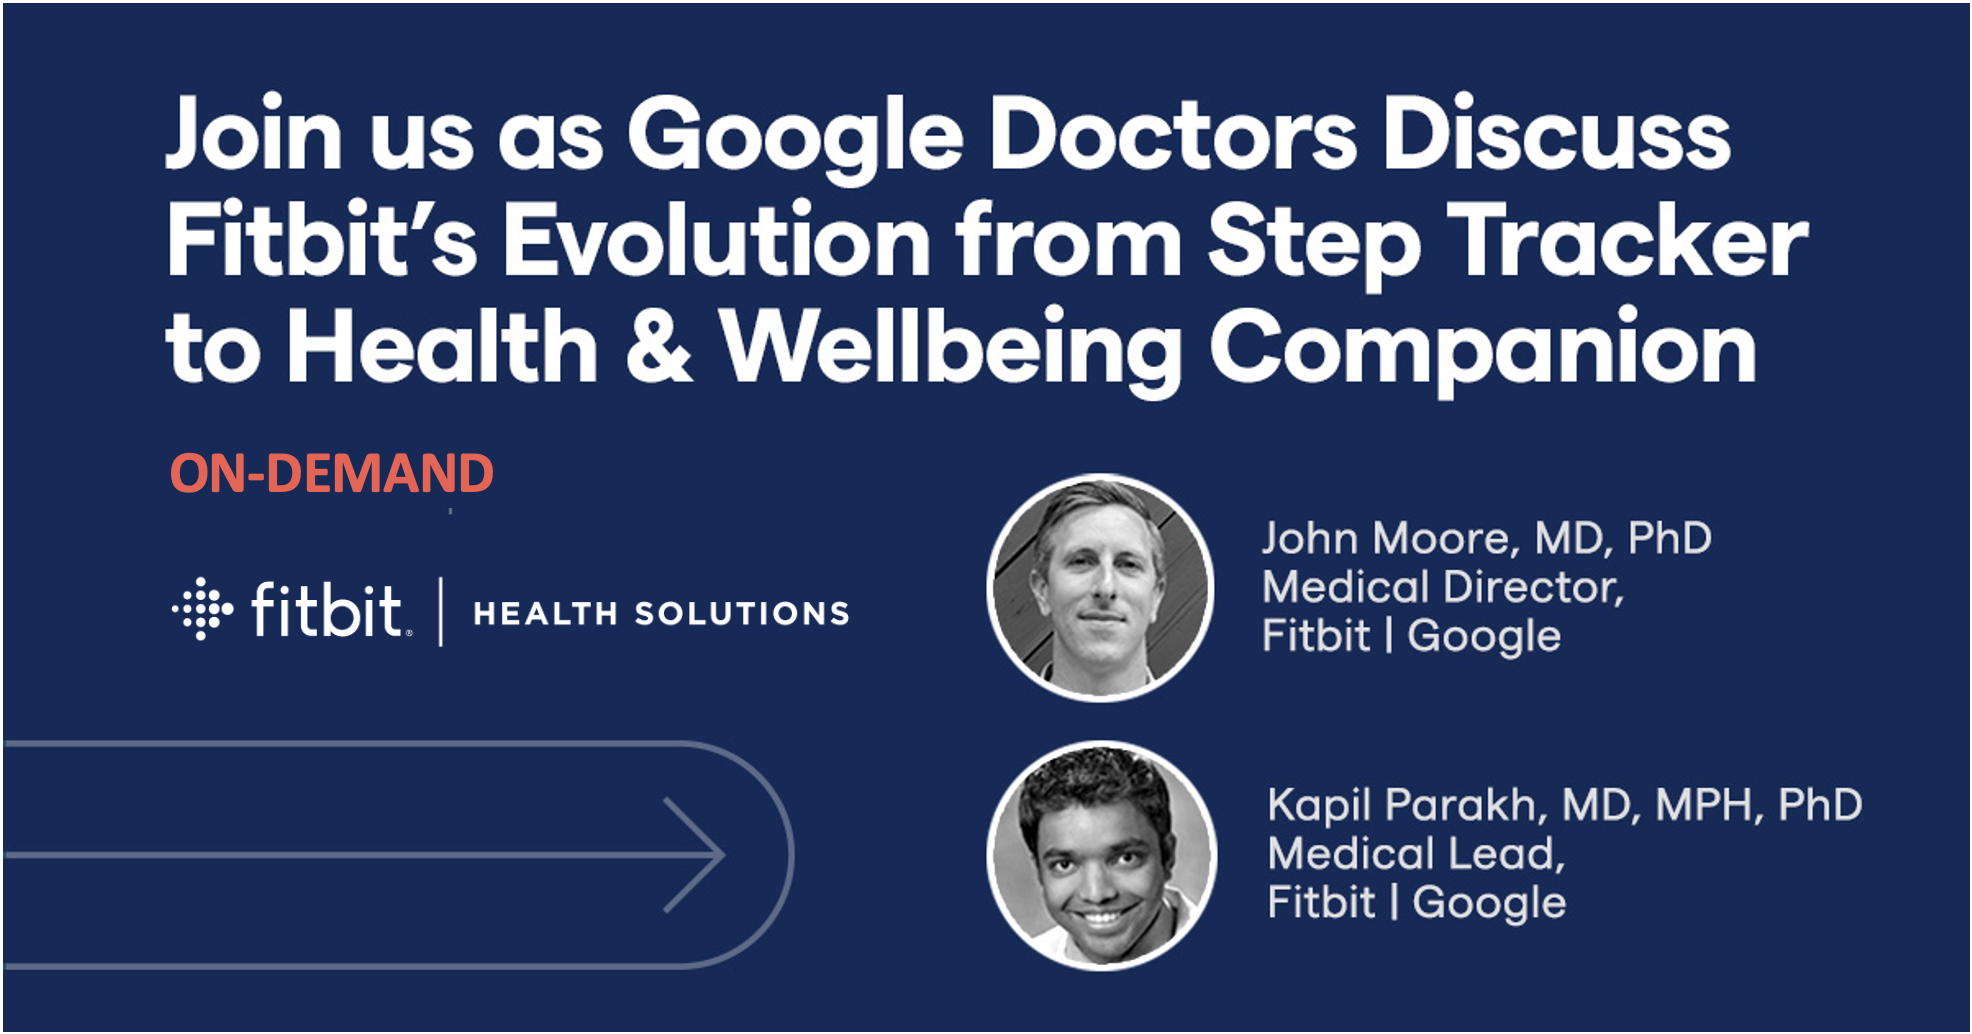 On-Demand: Webinar: From Step Tracker to Health & Wellbeing Companion: Google Doctors Discuss the Evolution of Fitbit